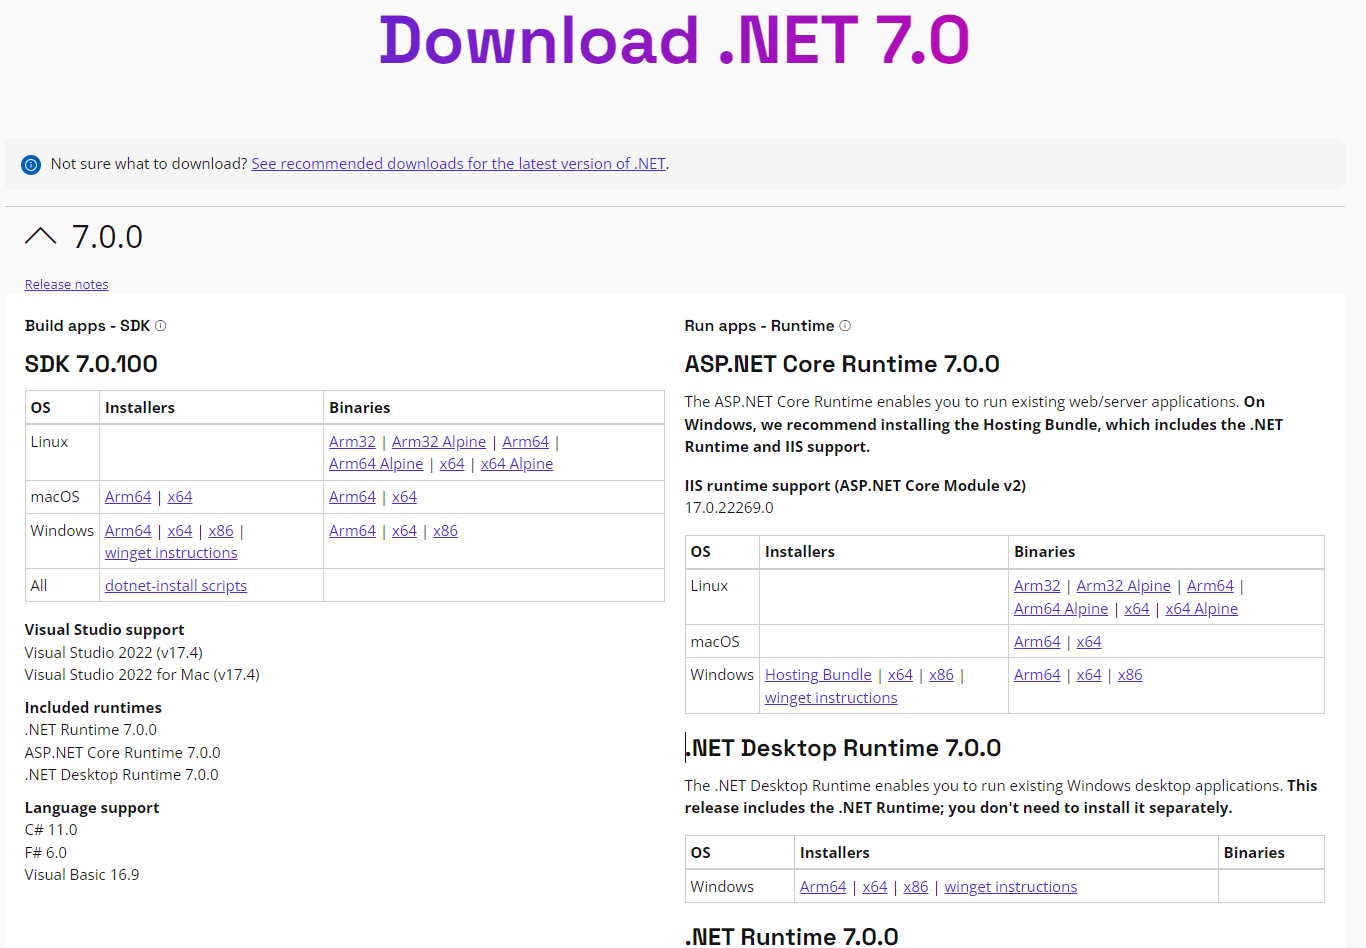 Download and install .NET 7 to use ASP.NET Core